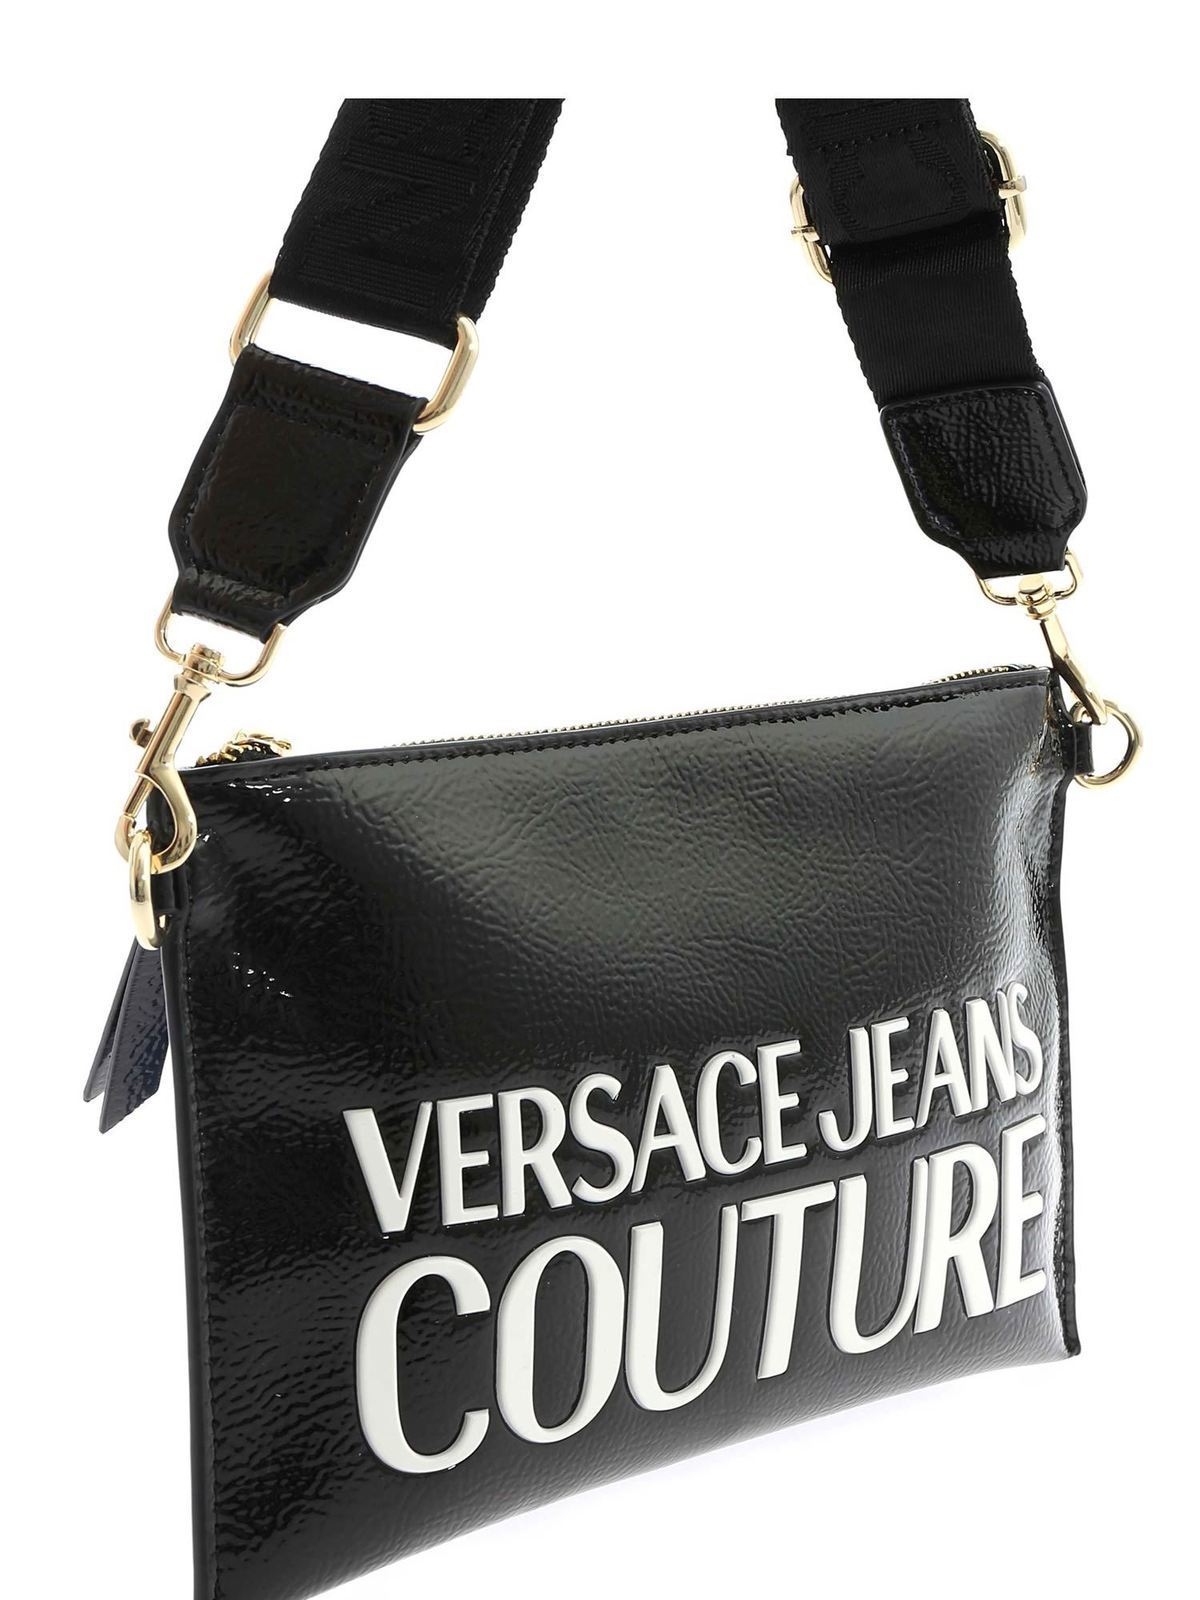 Versace Jeans Couture クラッチバッグ 黒 クラッチバッグ E1vzabpxmi9